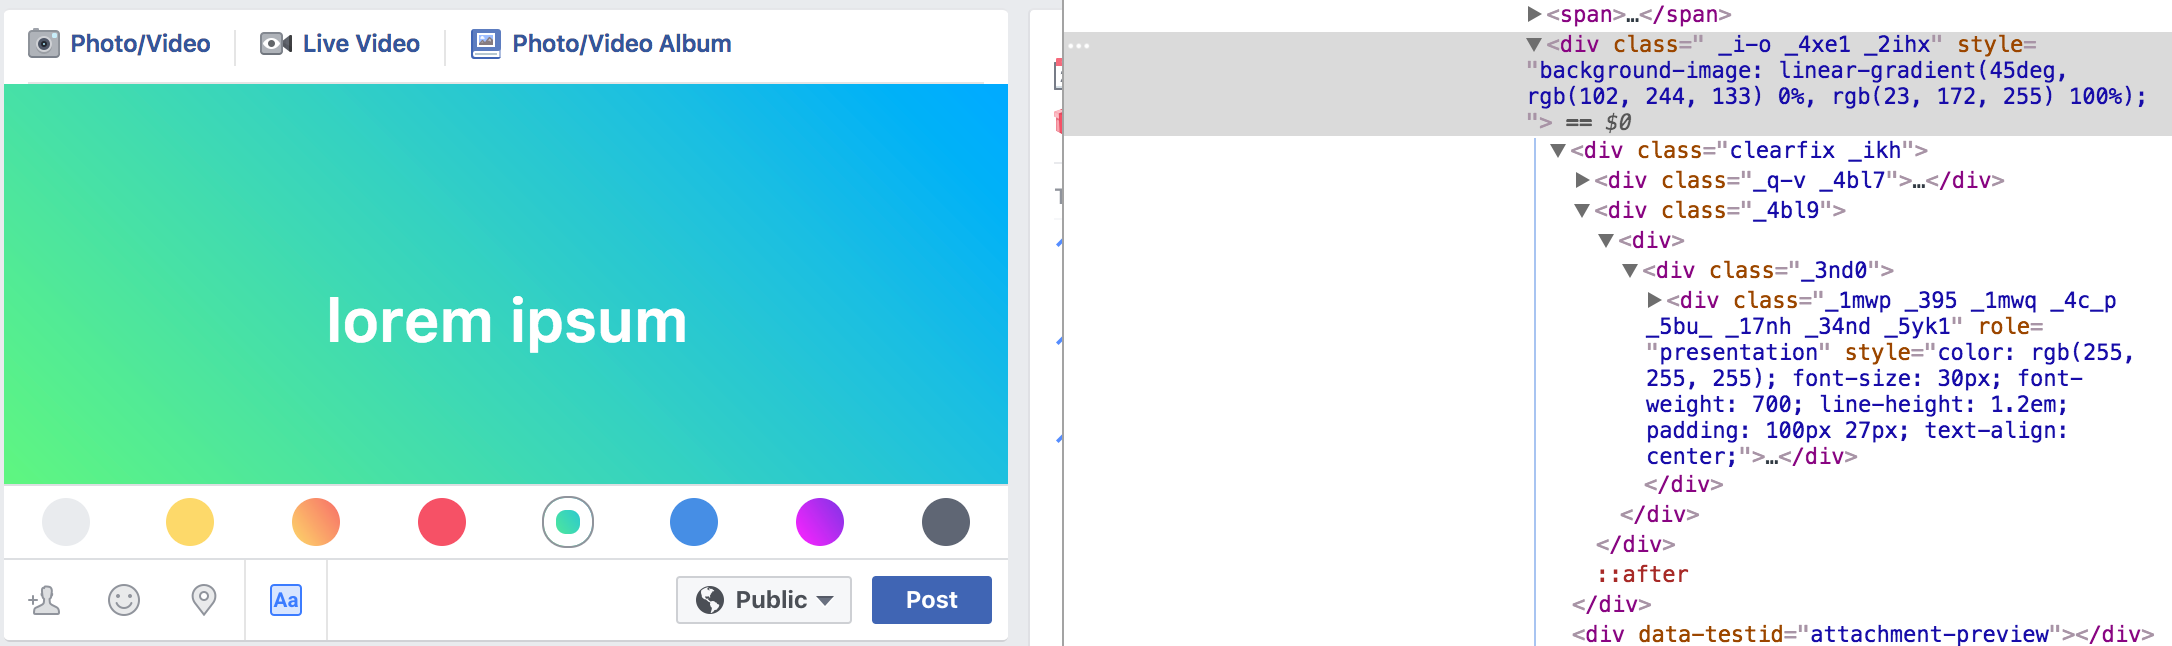 Facebook is Experimenting With Color Adaptive Profile Backgrounds